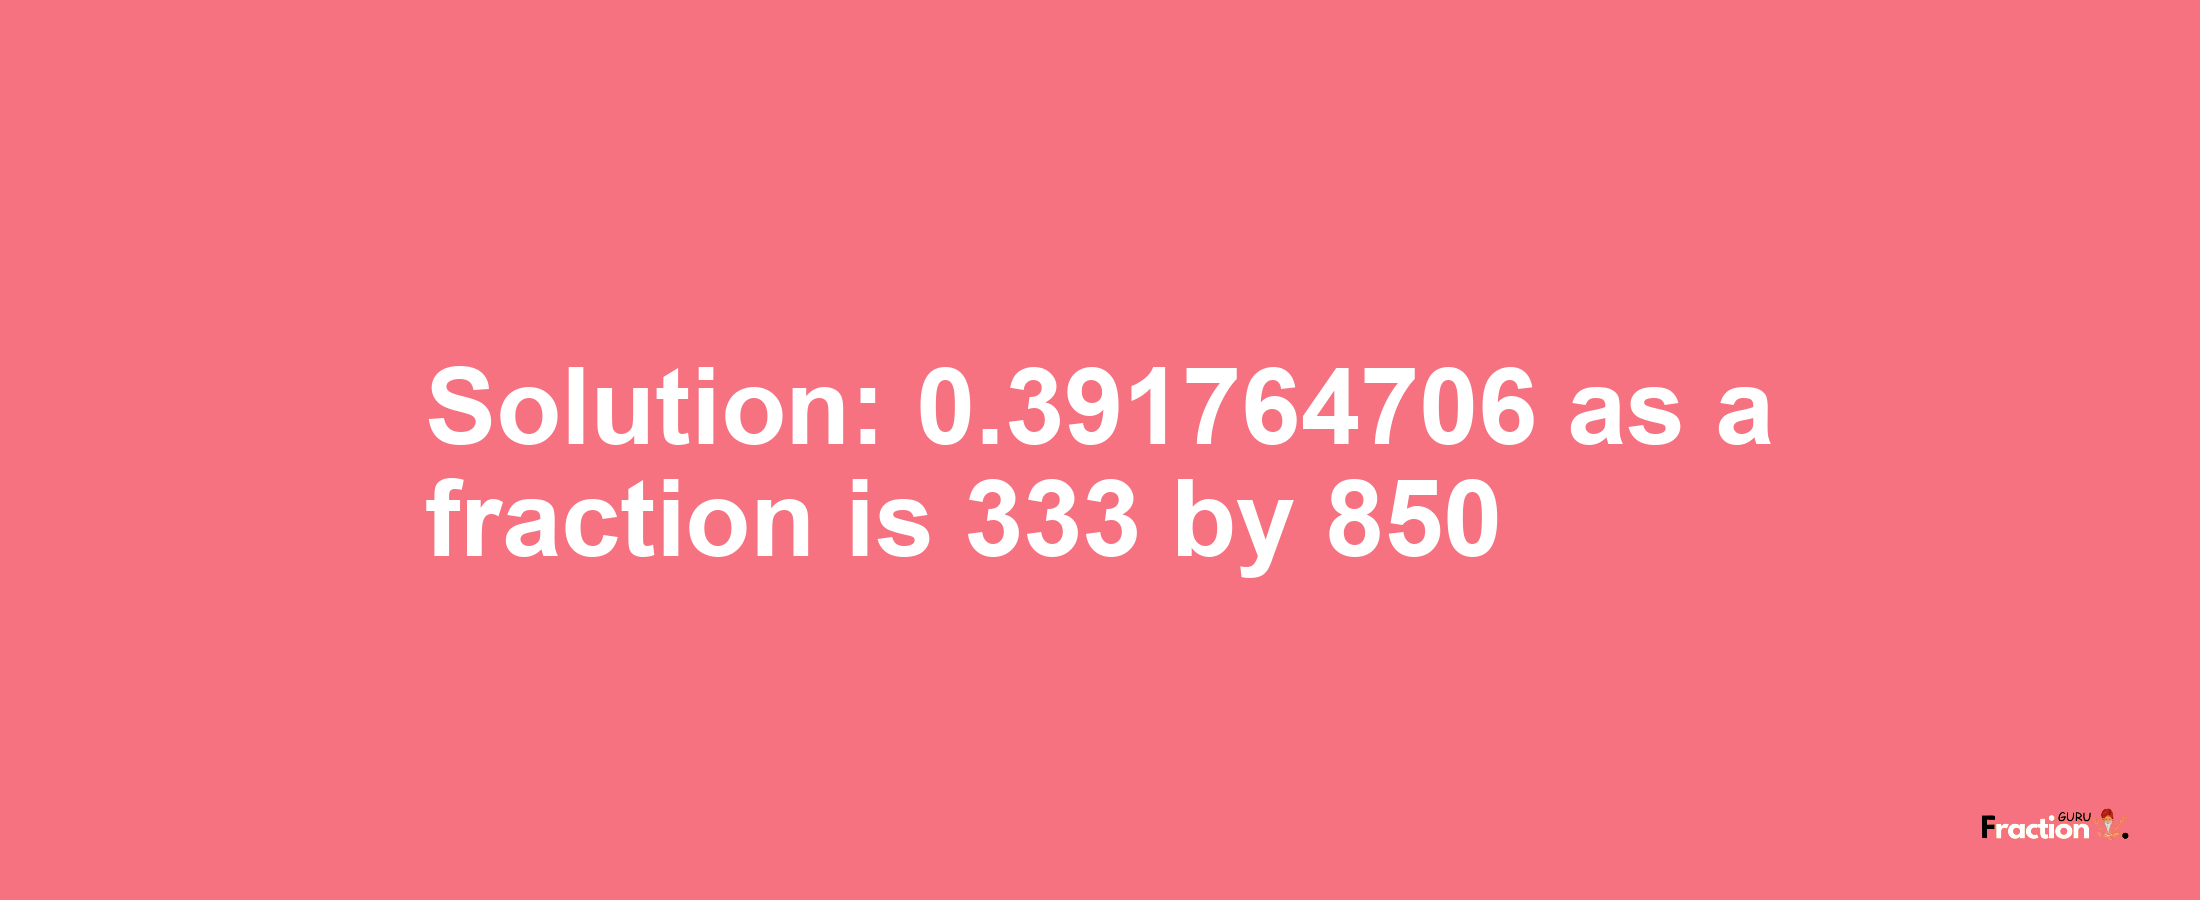 Solution:0.391764706 as a fraction is 333/850